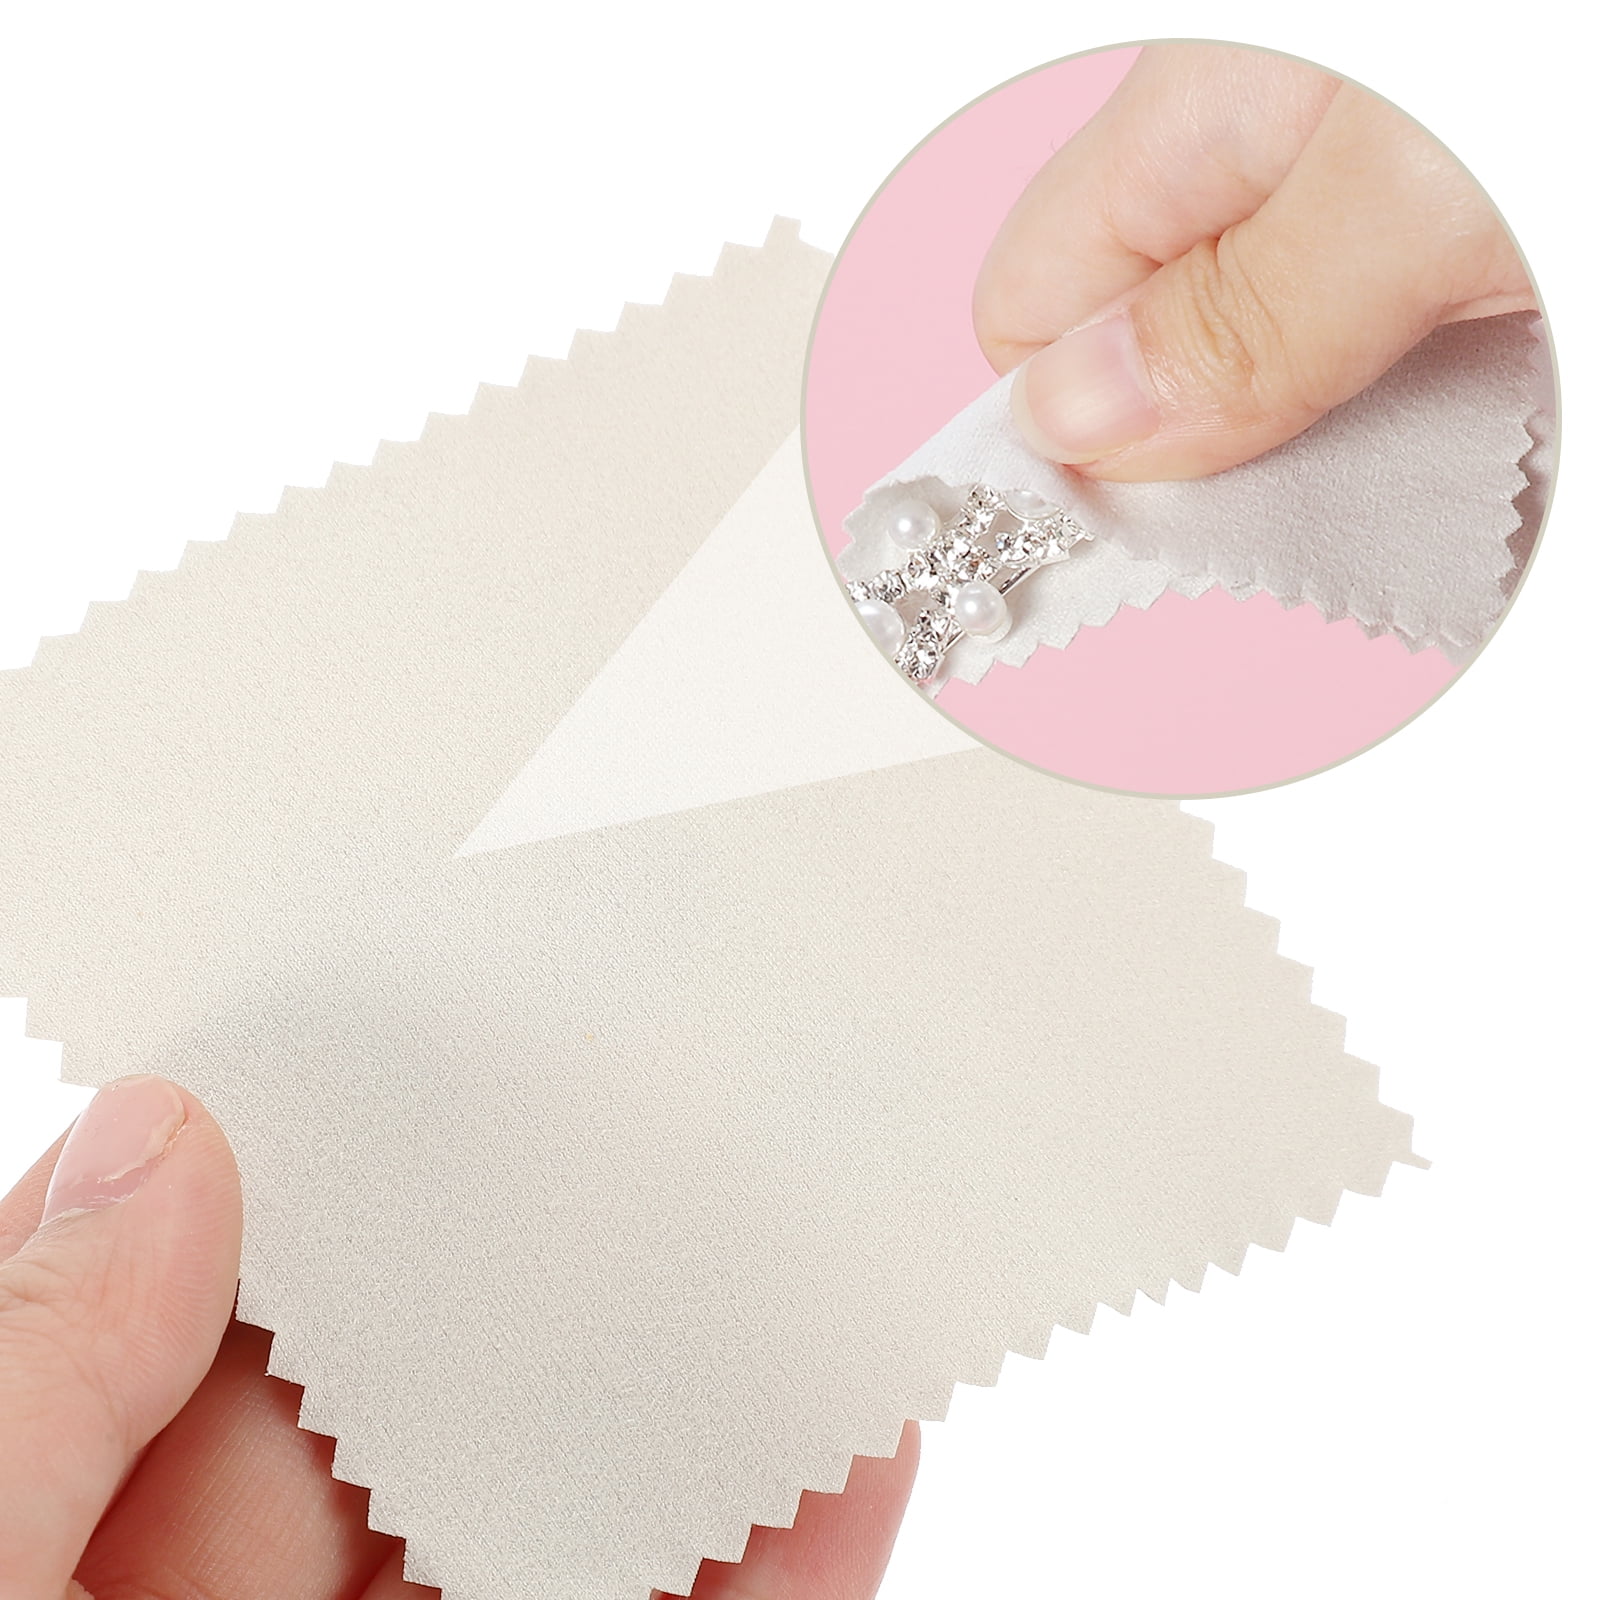 SEVENWELL 50pcs Jewelry Cleaning Cloth Pink Polishing Cloth for